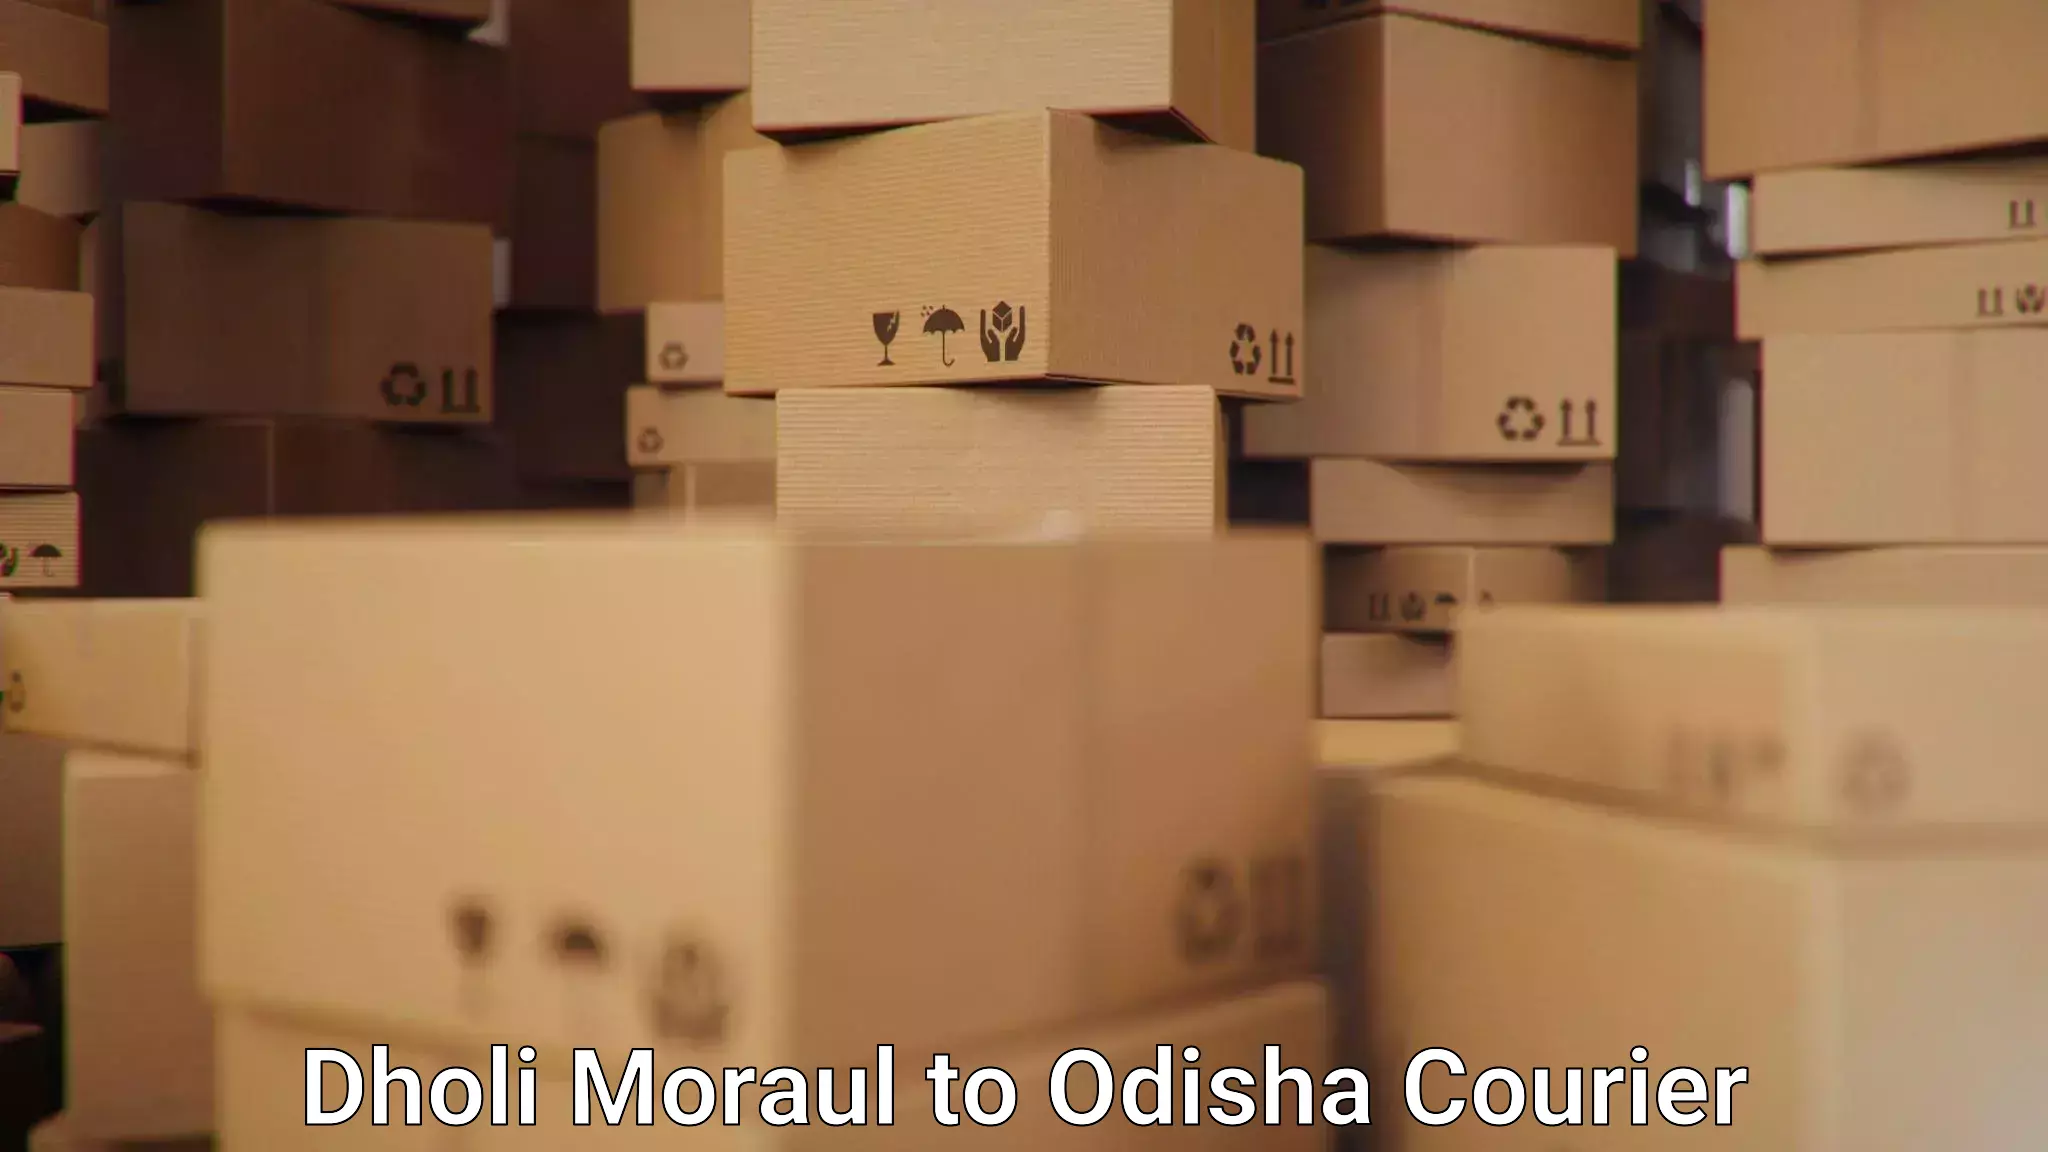 Online package tracking Dholi Moraul to Gajapati